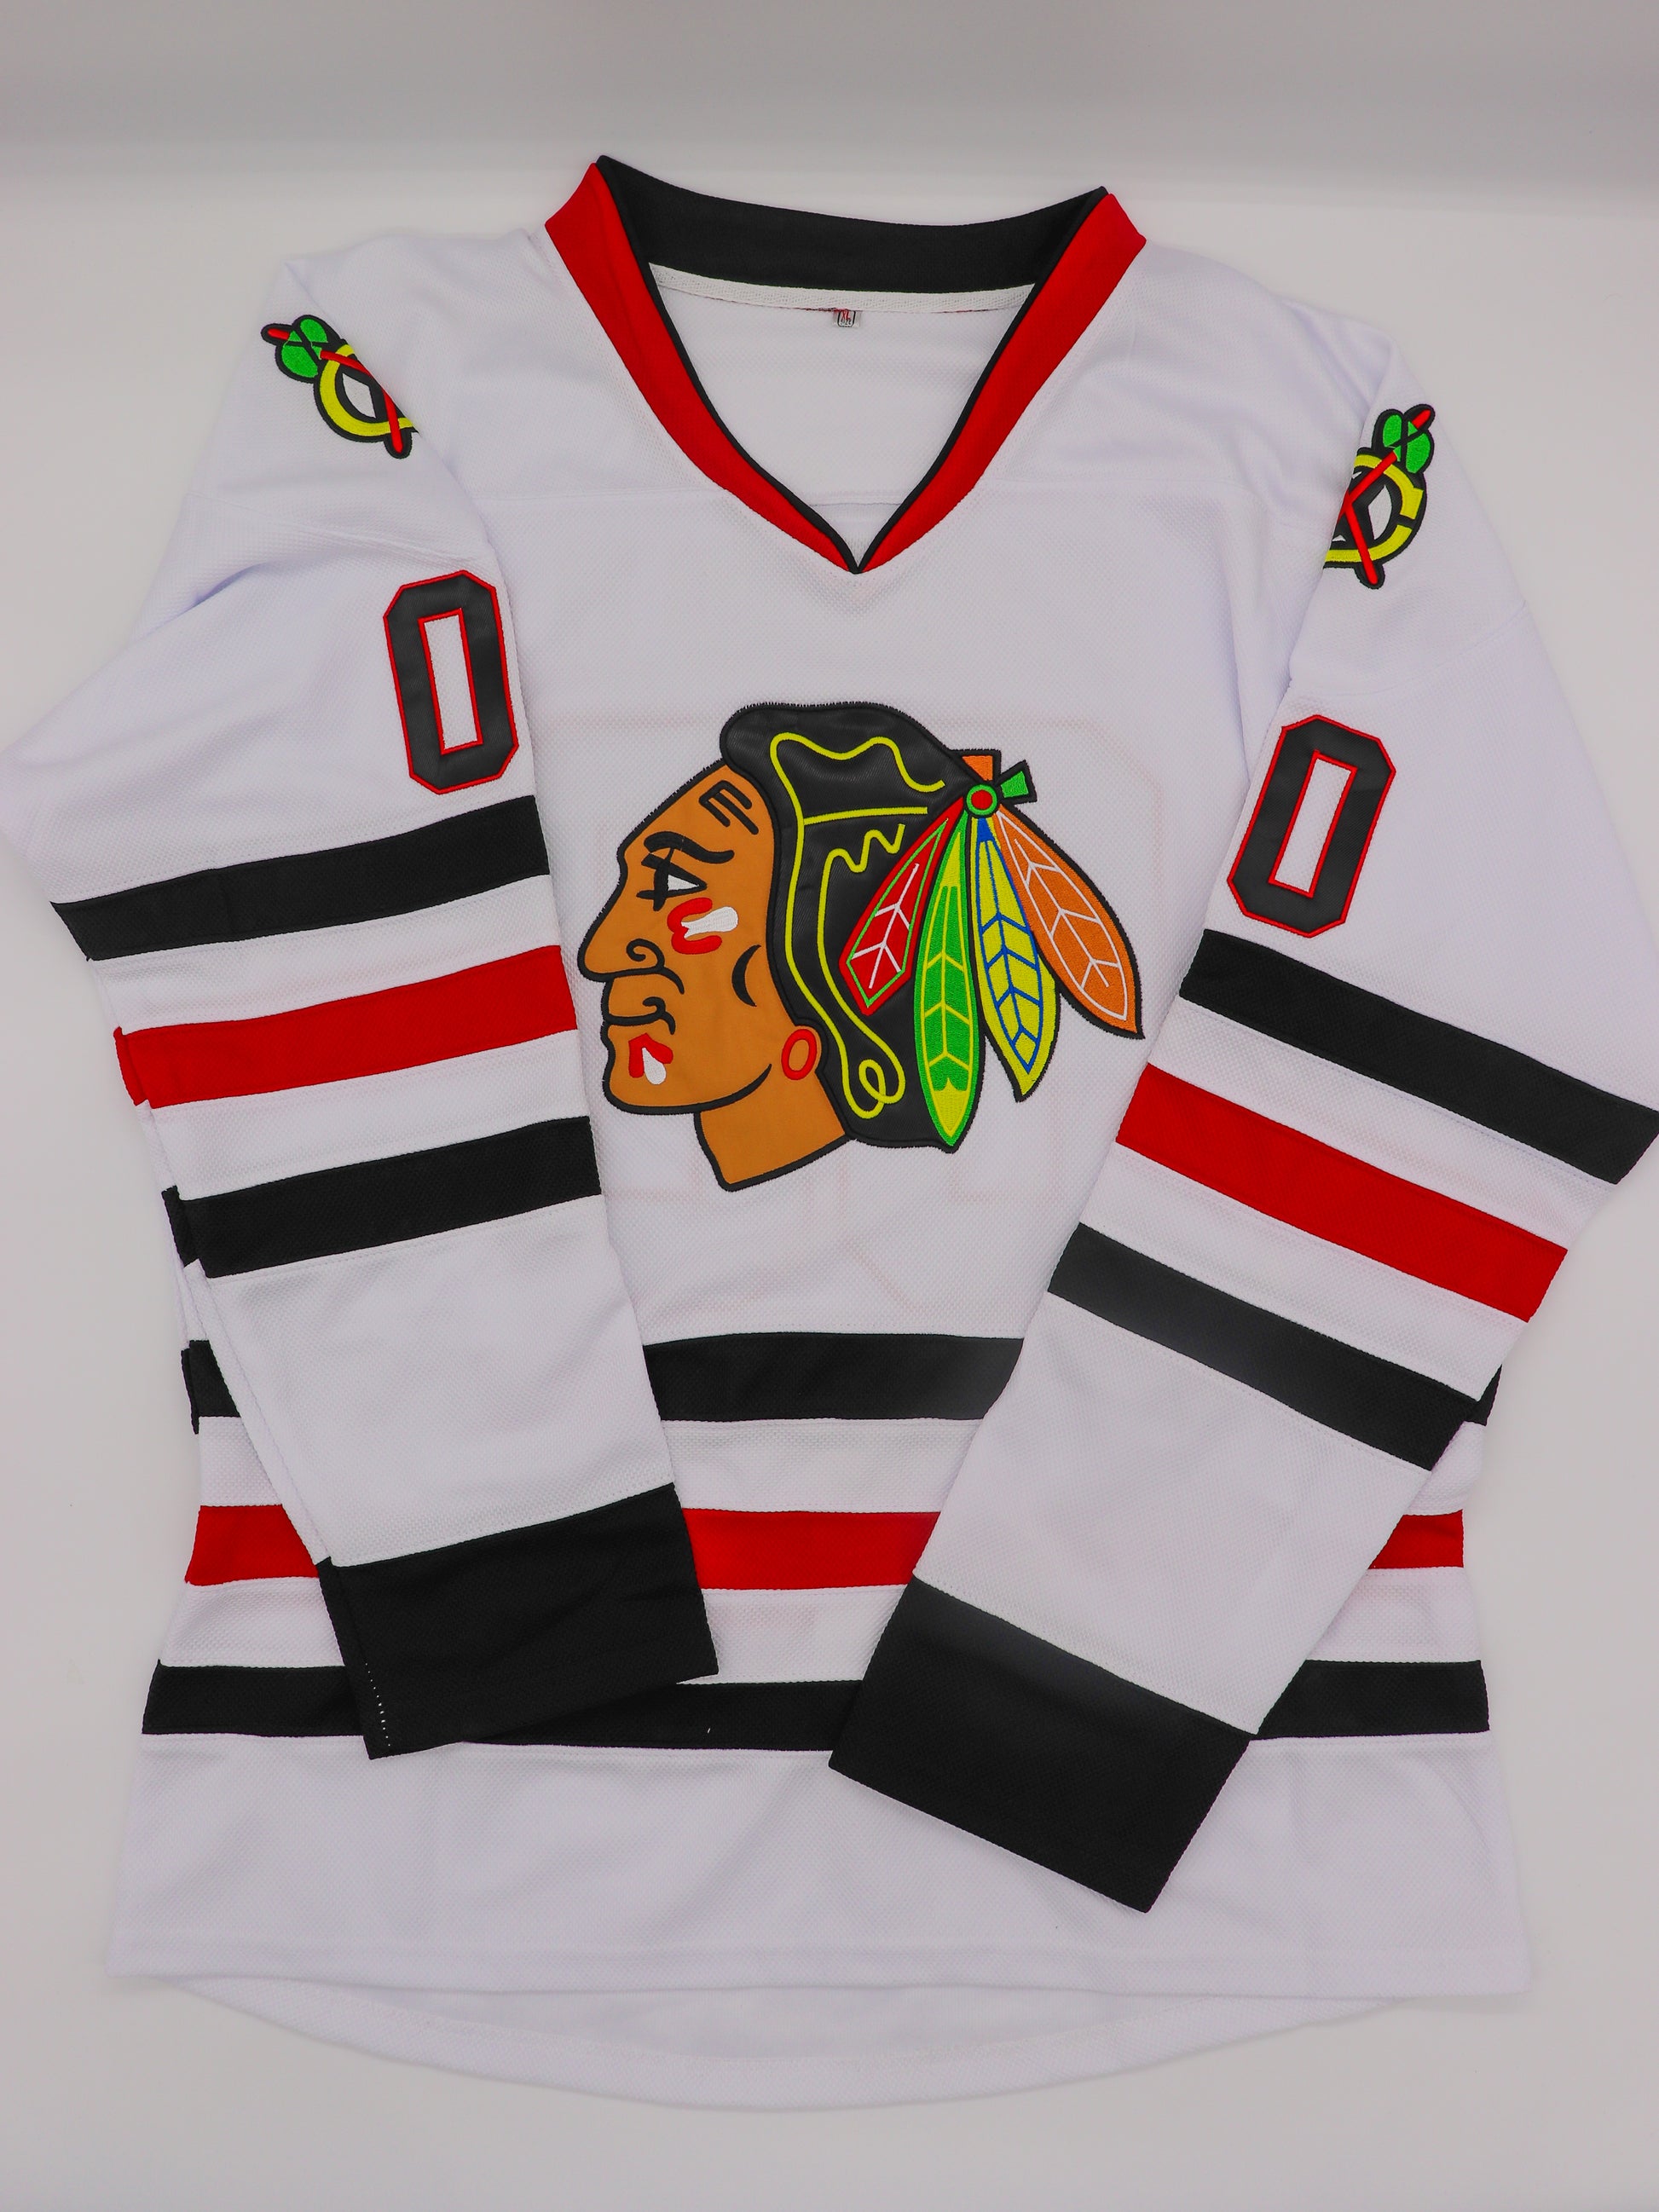 NEW Clark Griswold Christmas Vacation Chicago Blackhawks Hockey Jersey 2XL